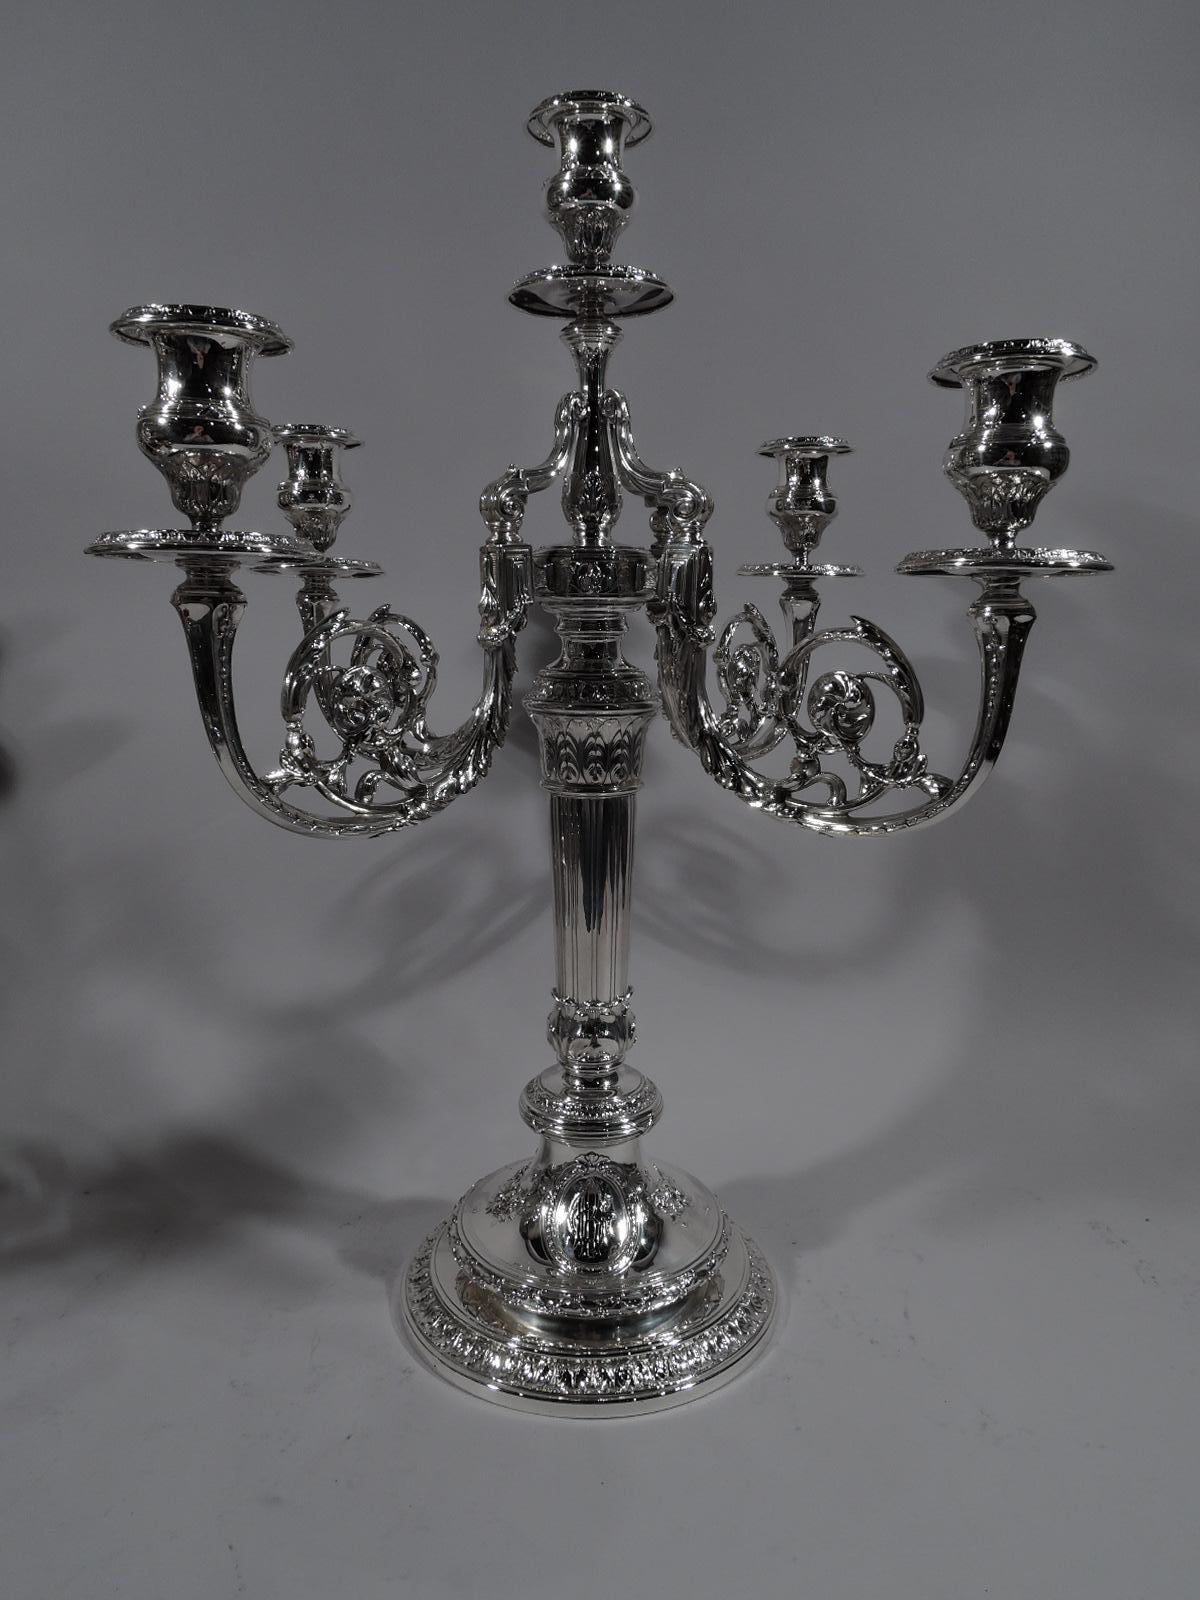 Pair of large French neoclassical sterling silver five-light candelabra. Made by Gorham in Providence, circa 1910.

Each: Tapering fluted shaft with vertical leaves at top and bottom. Double-domed base with reeded, leaf-and-dart, and